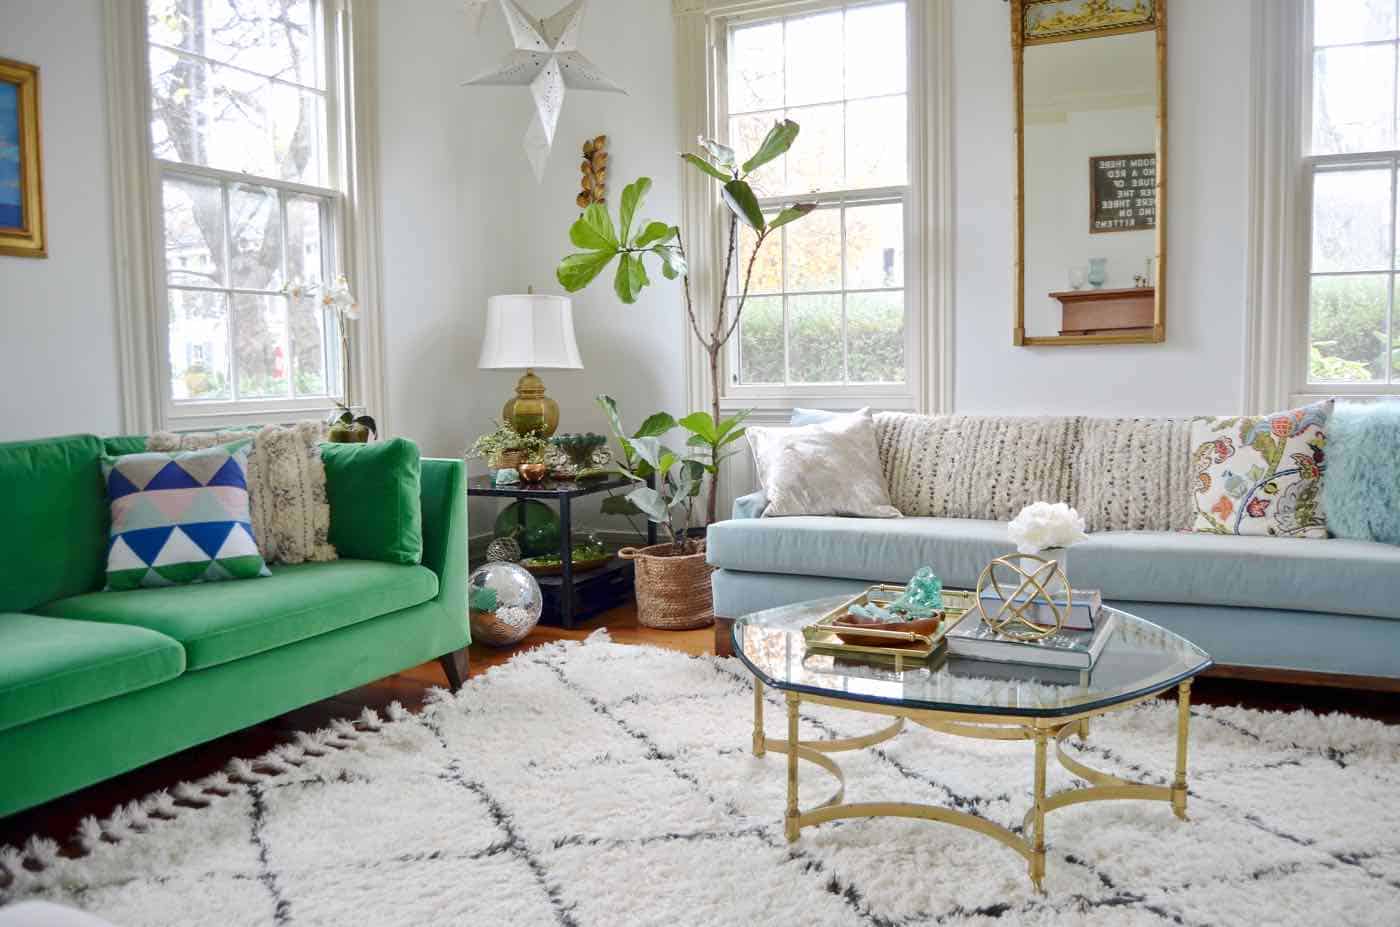 Living room refresh to open up the space and brighten the room.